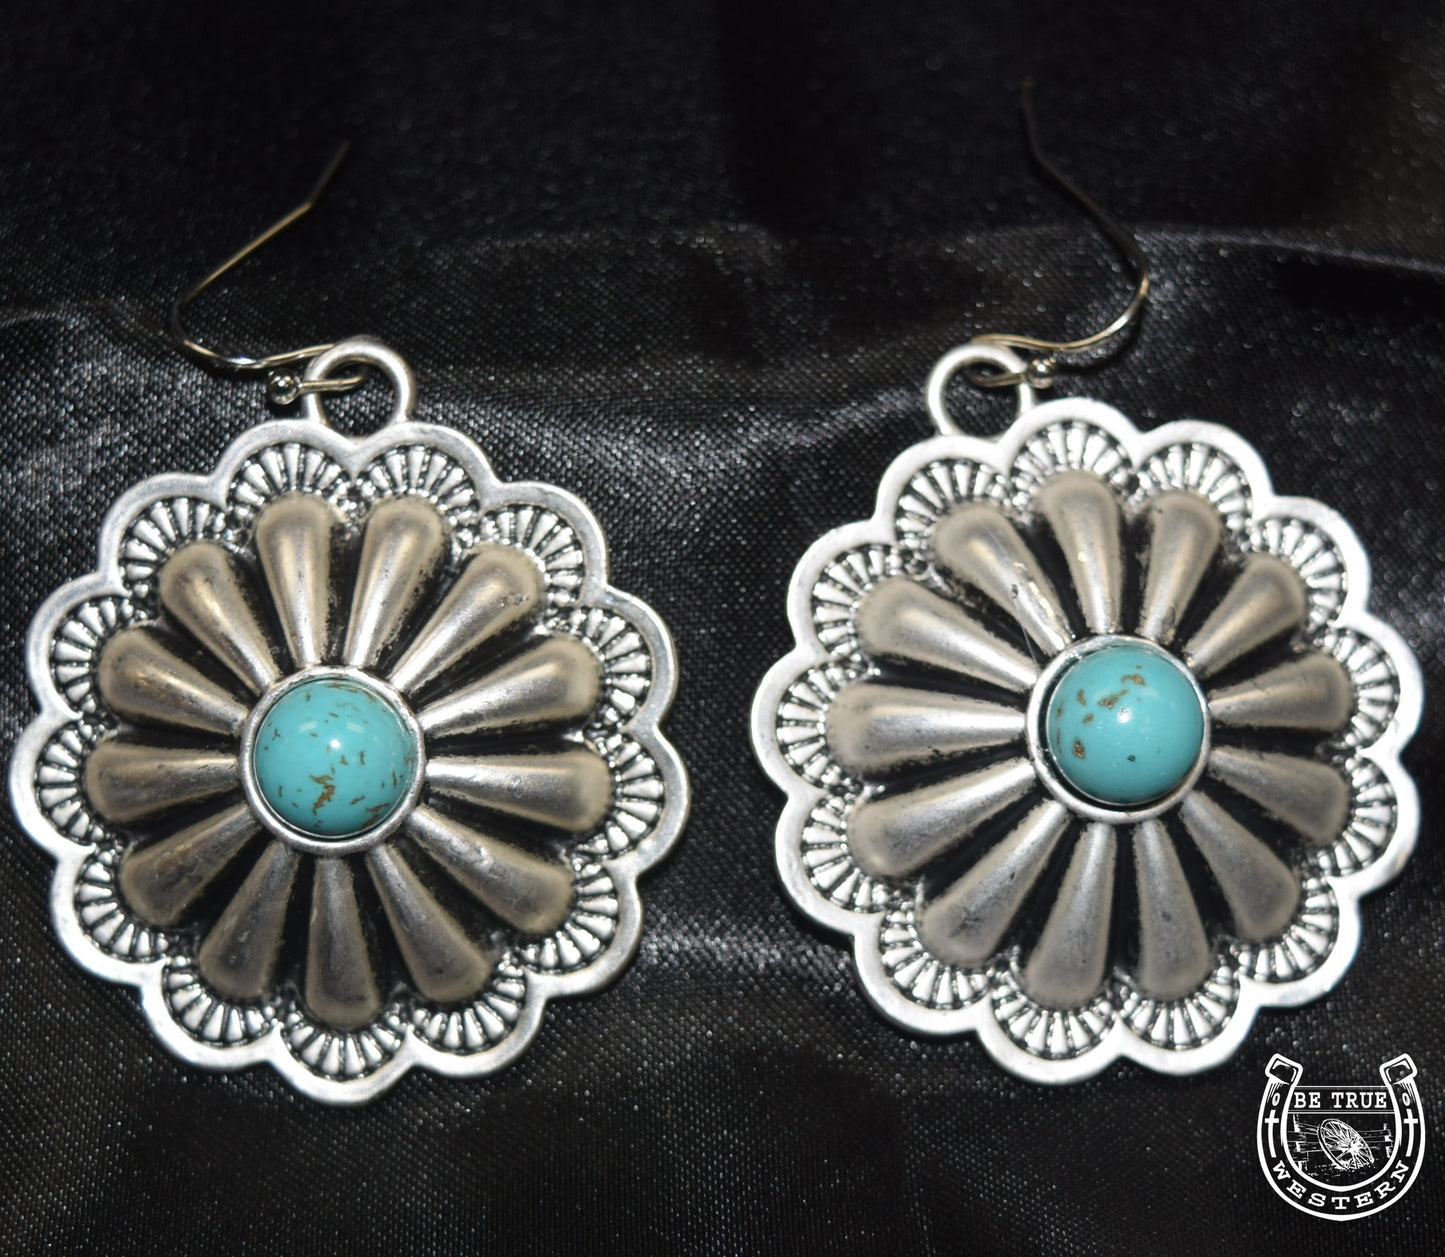 The Turquoise Large Concho Earrings